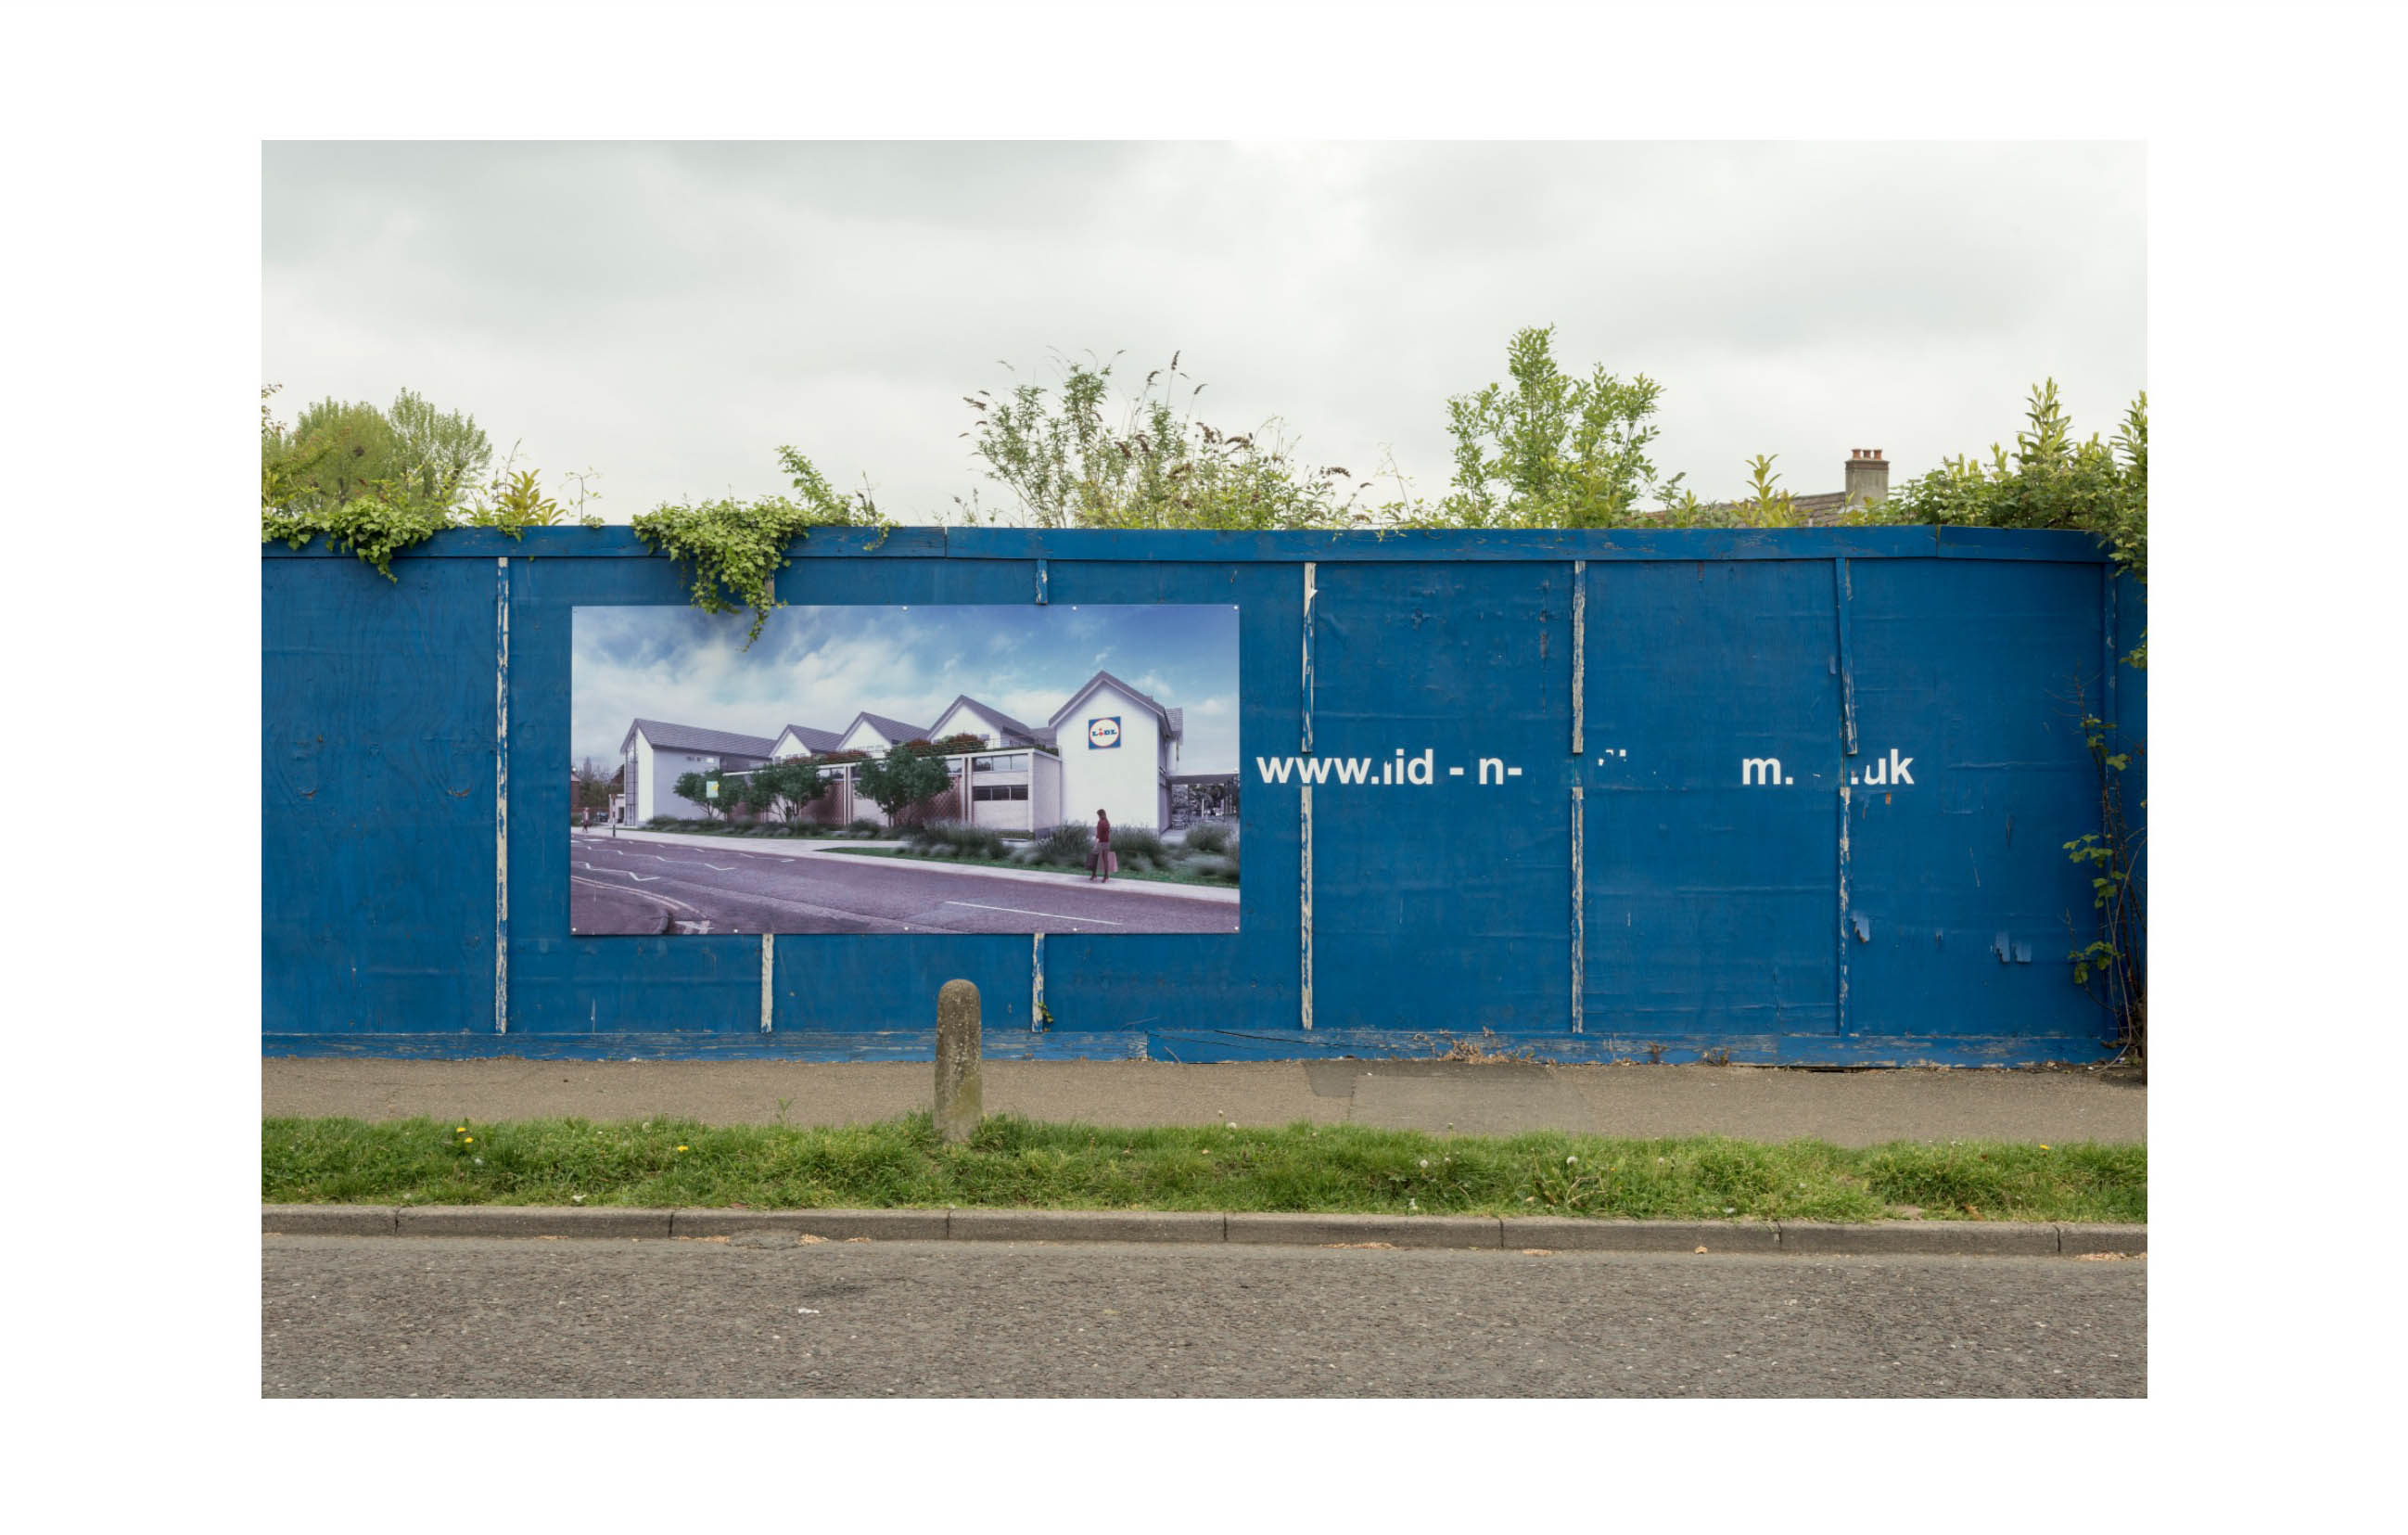 a blue hoarding show an architects impression of a new Lidl supermarket, next to the picture is a weathered and indecipherable website address